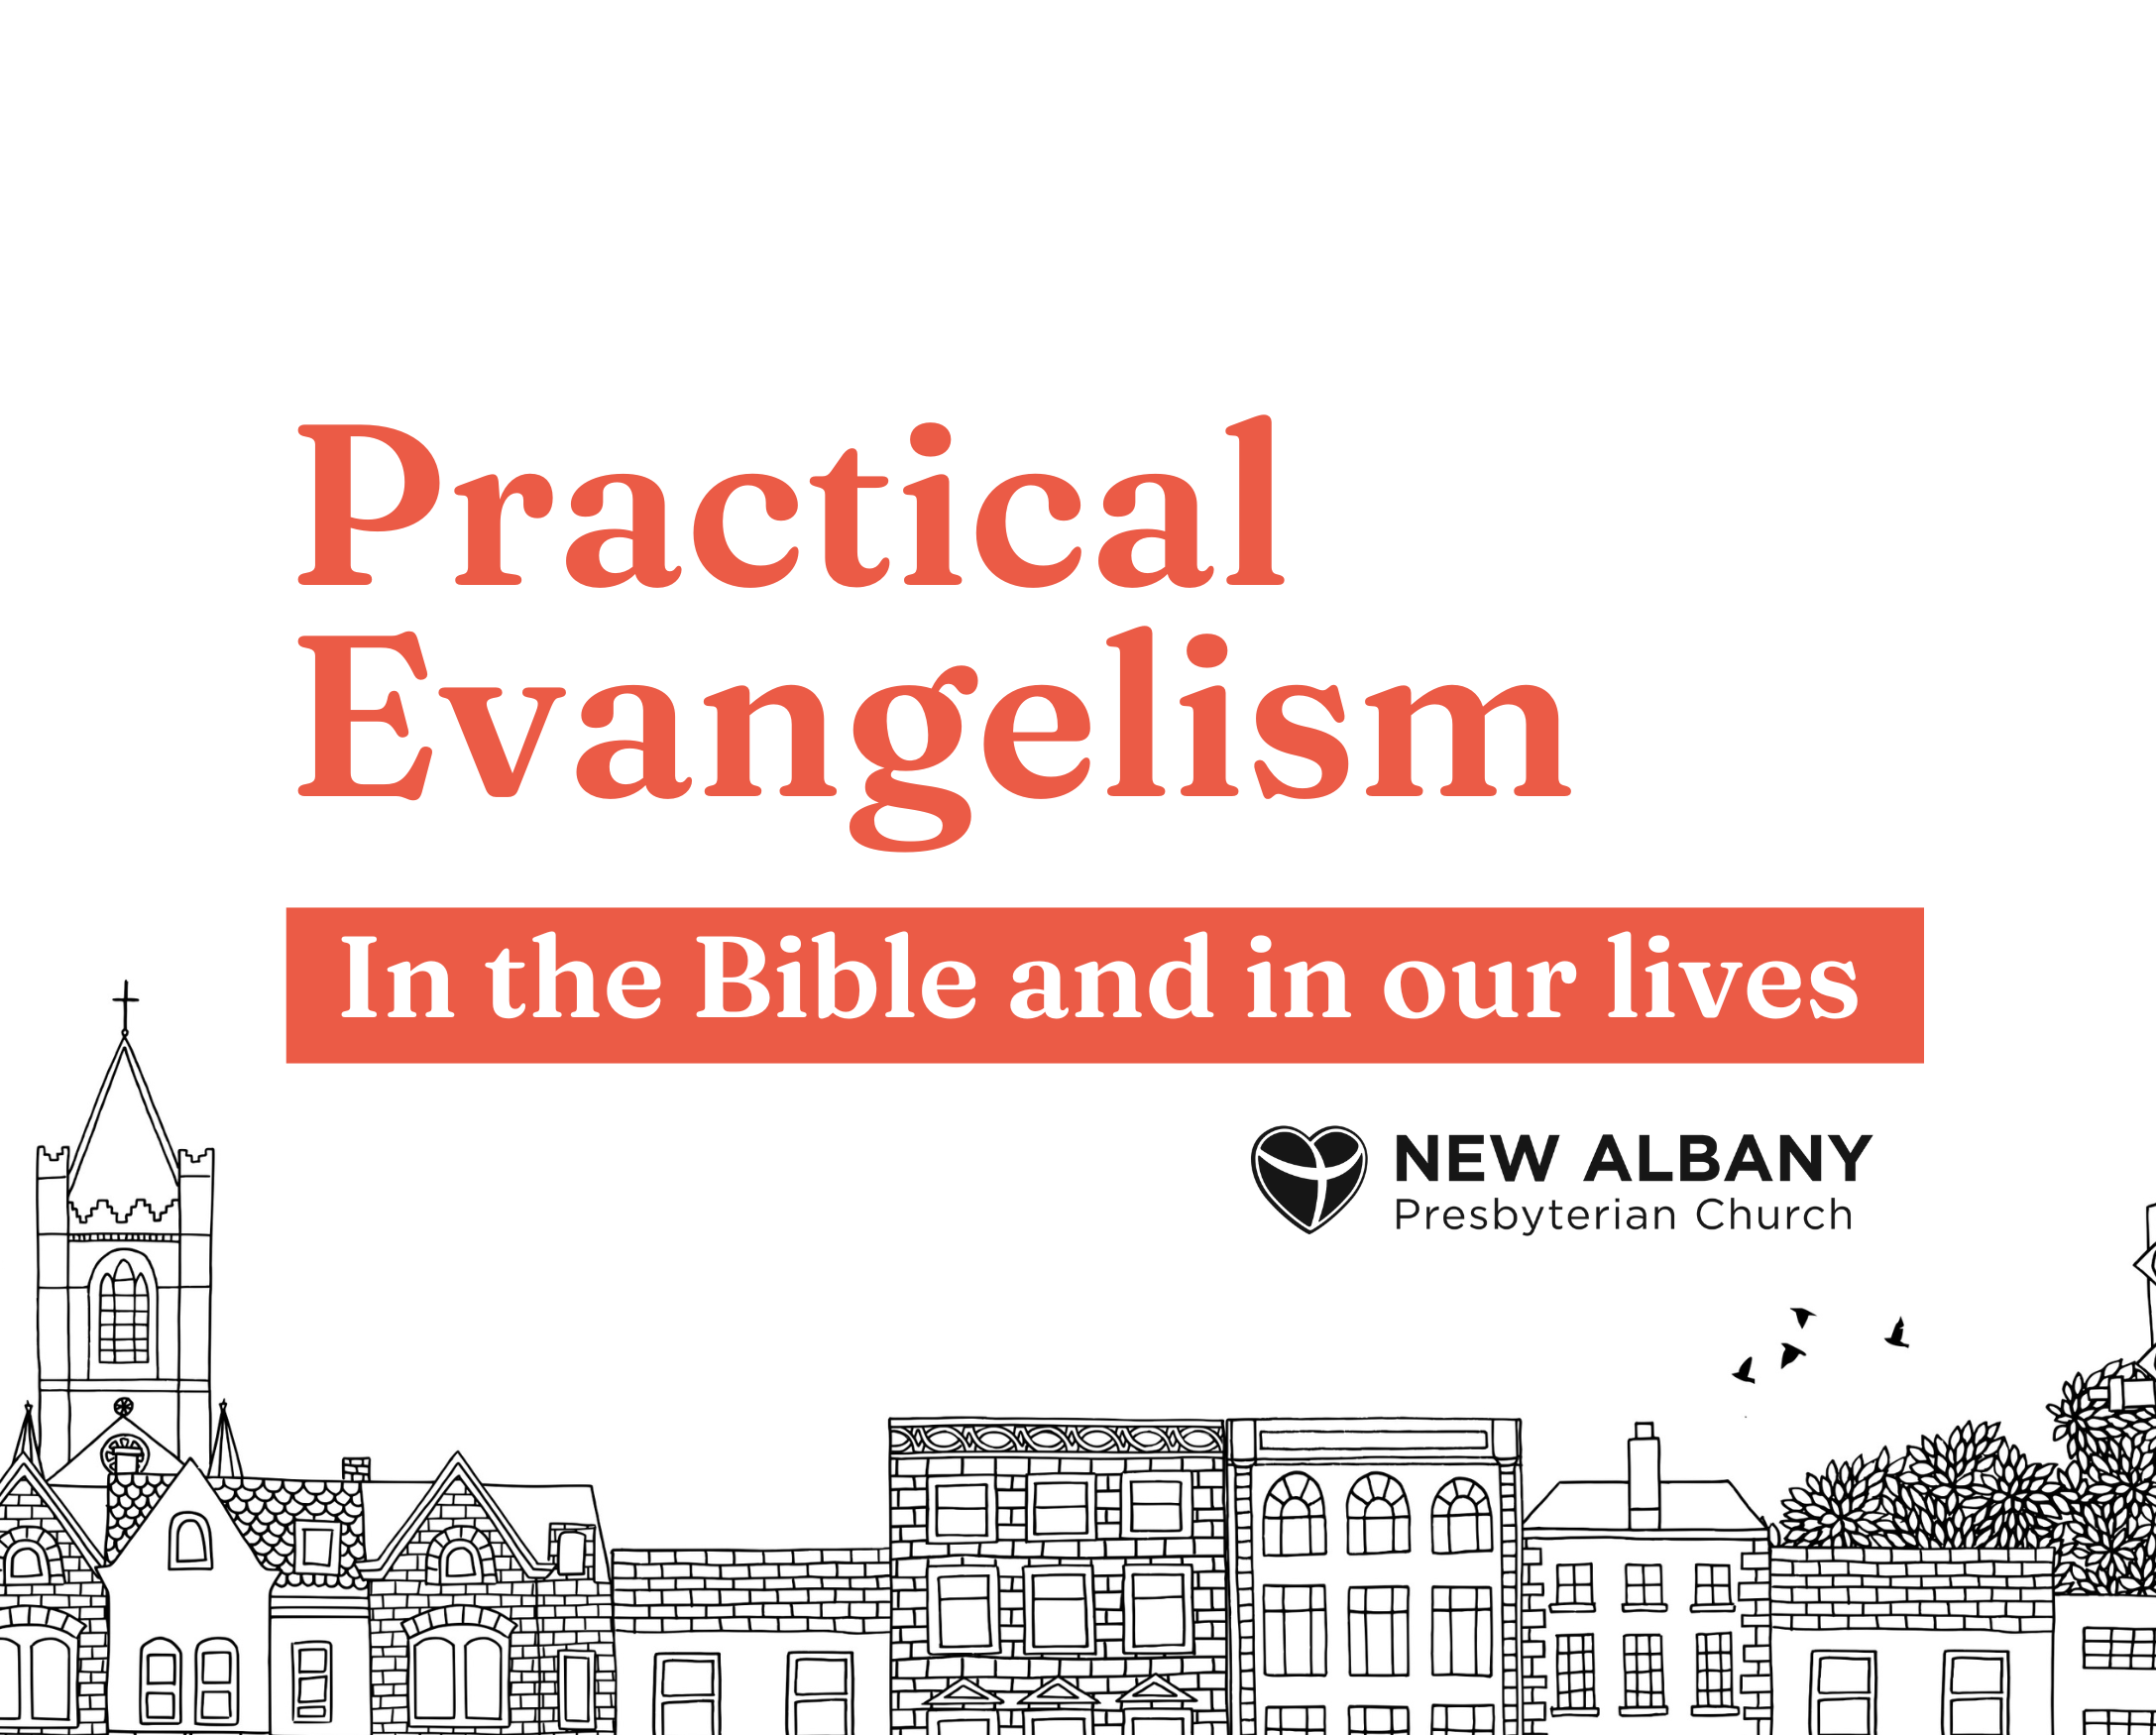 Practical Evangelism in the Bible and our lives: Cultural Savvy: Paul in Athens